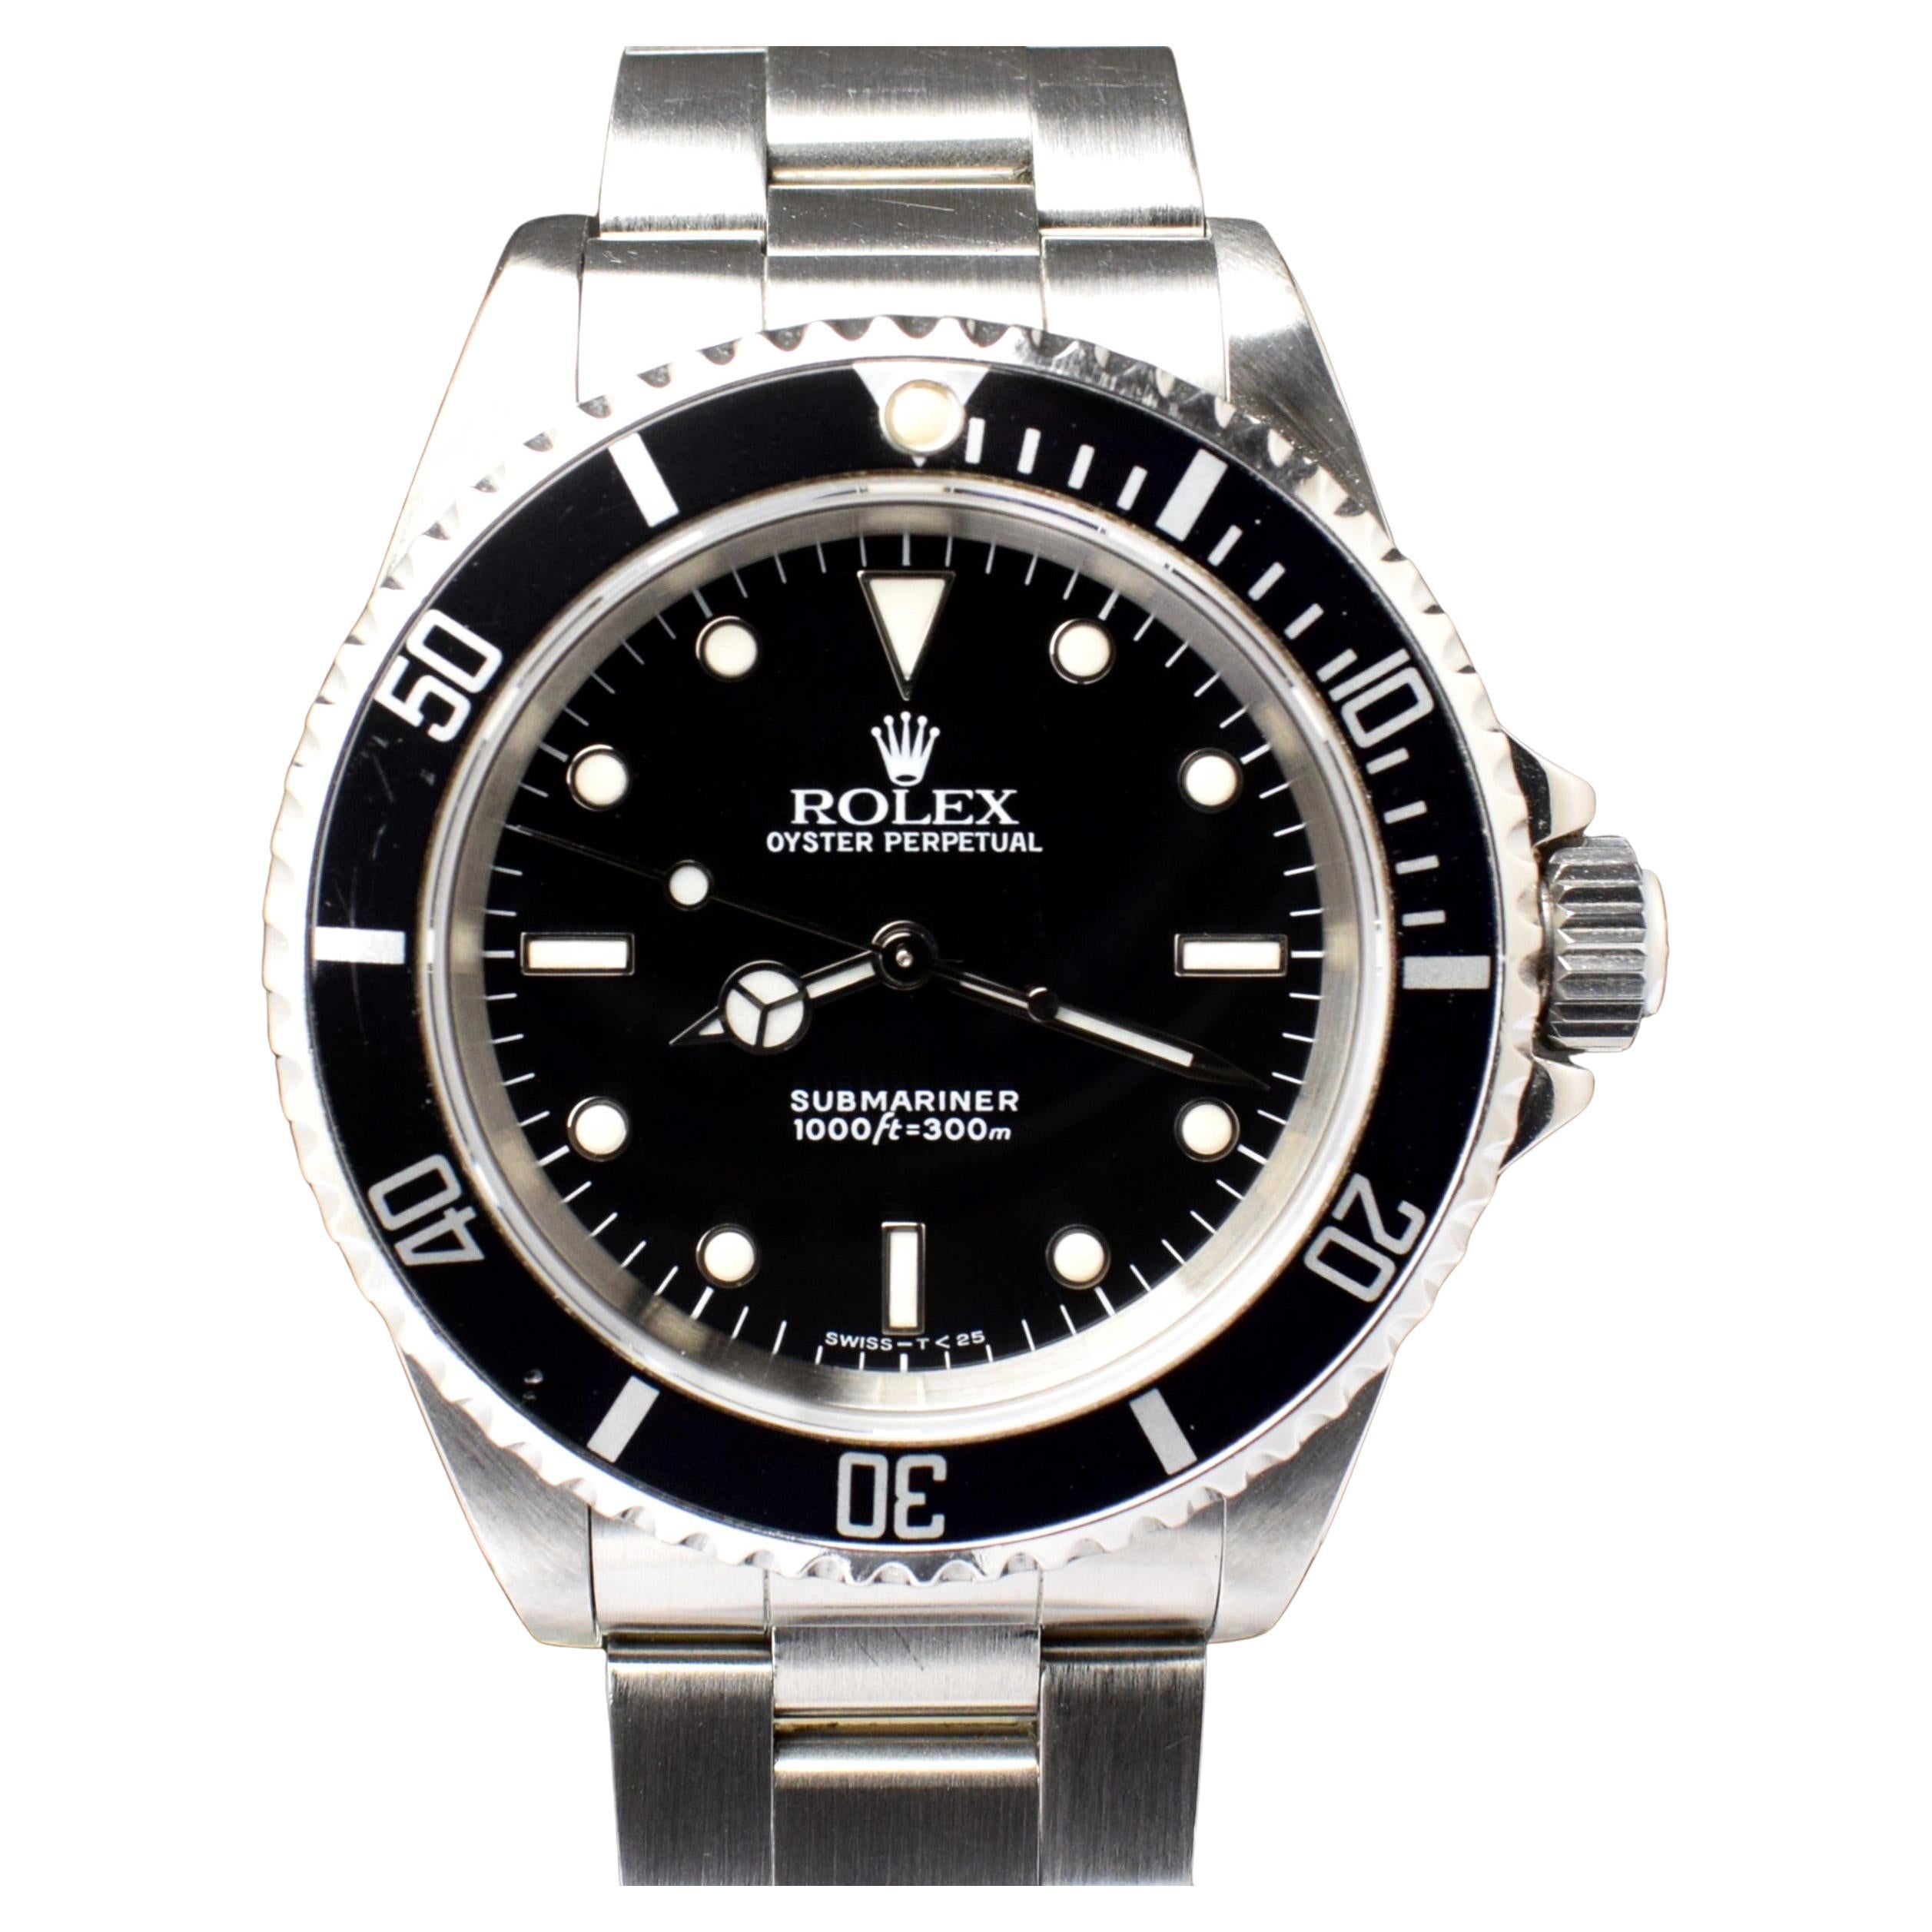 Rolex Submariner No Date Steel 14060 Automatic Watch with Paper Tag 1990